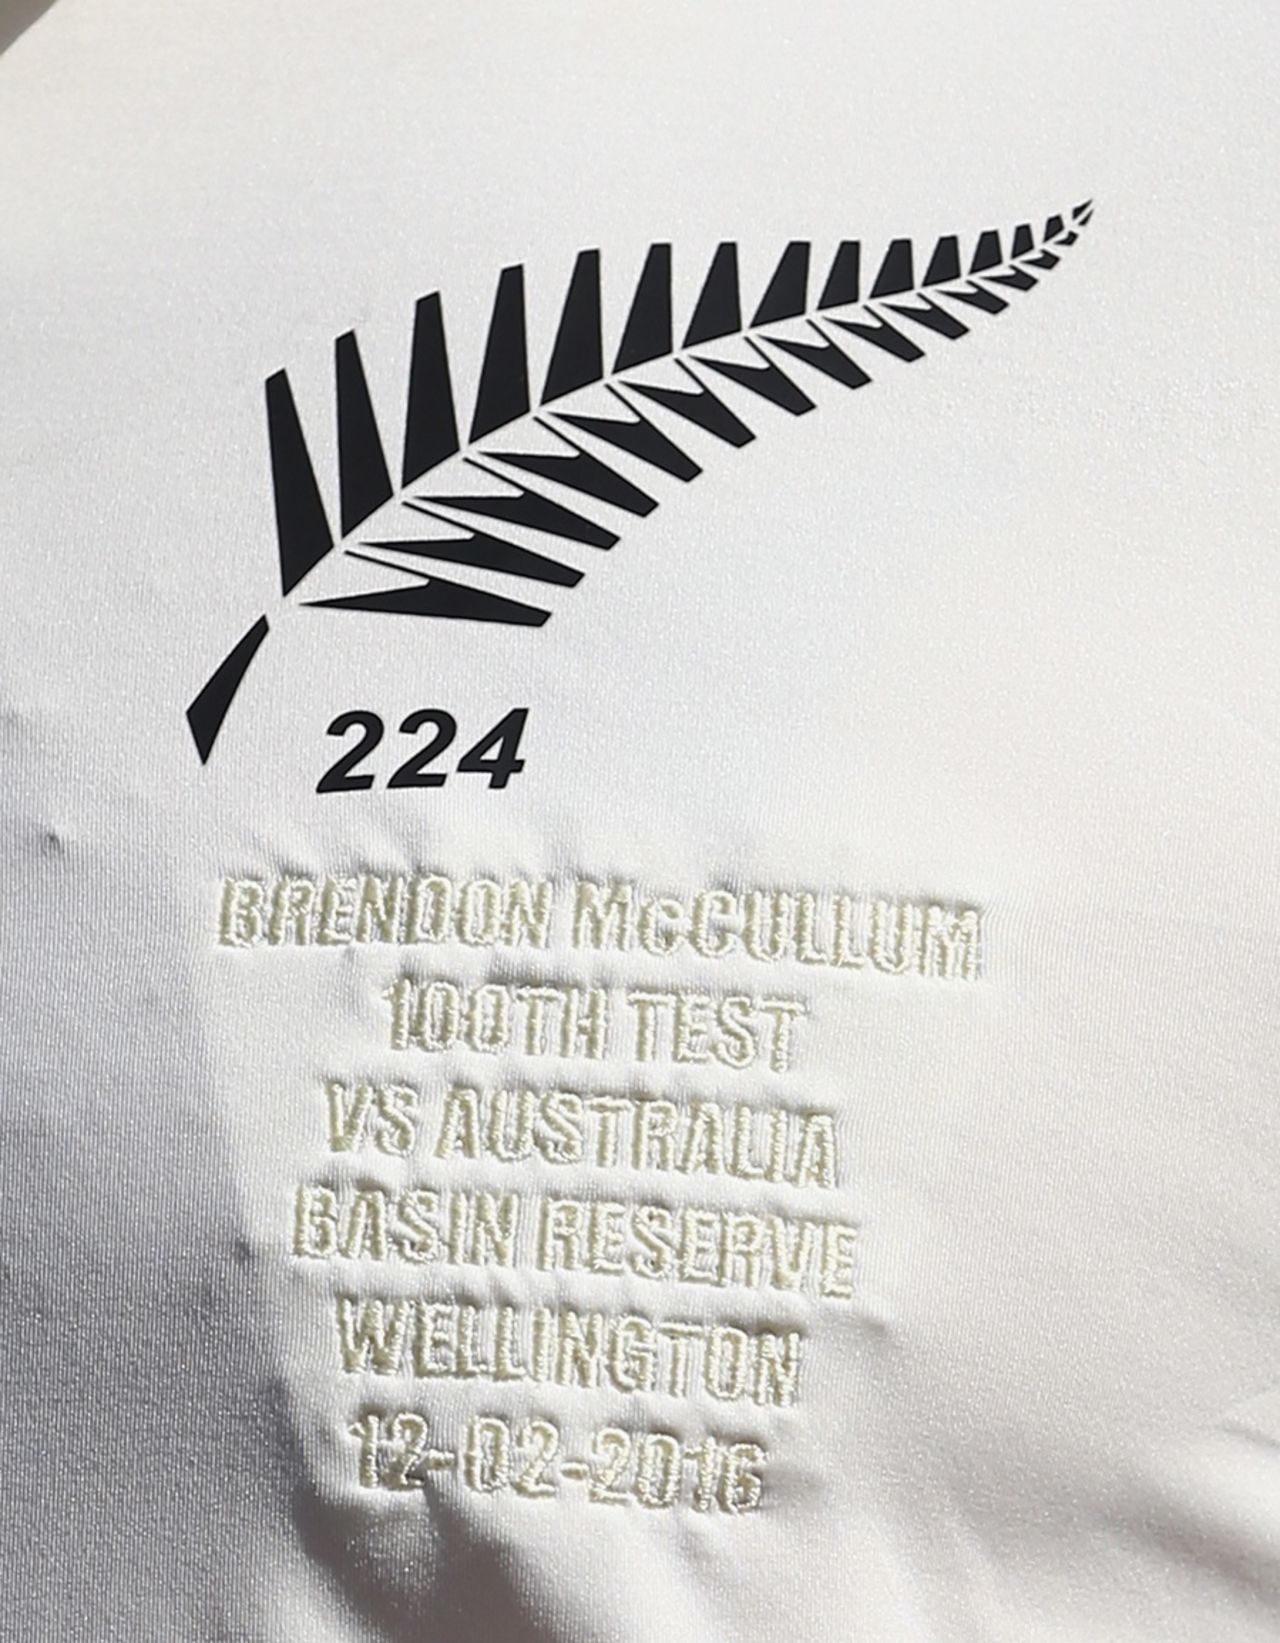 A special shirt for a special occasion, New Zealand v Australia, 1st Test, Wellington, 1st day, February 12, 2016, 